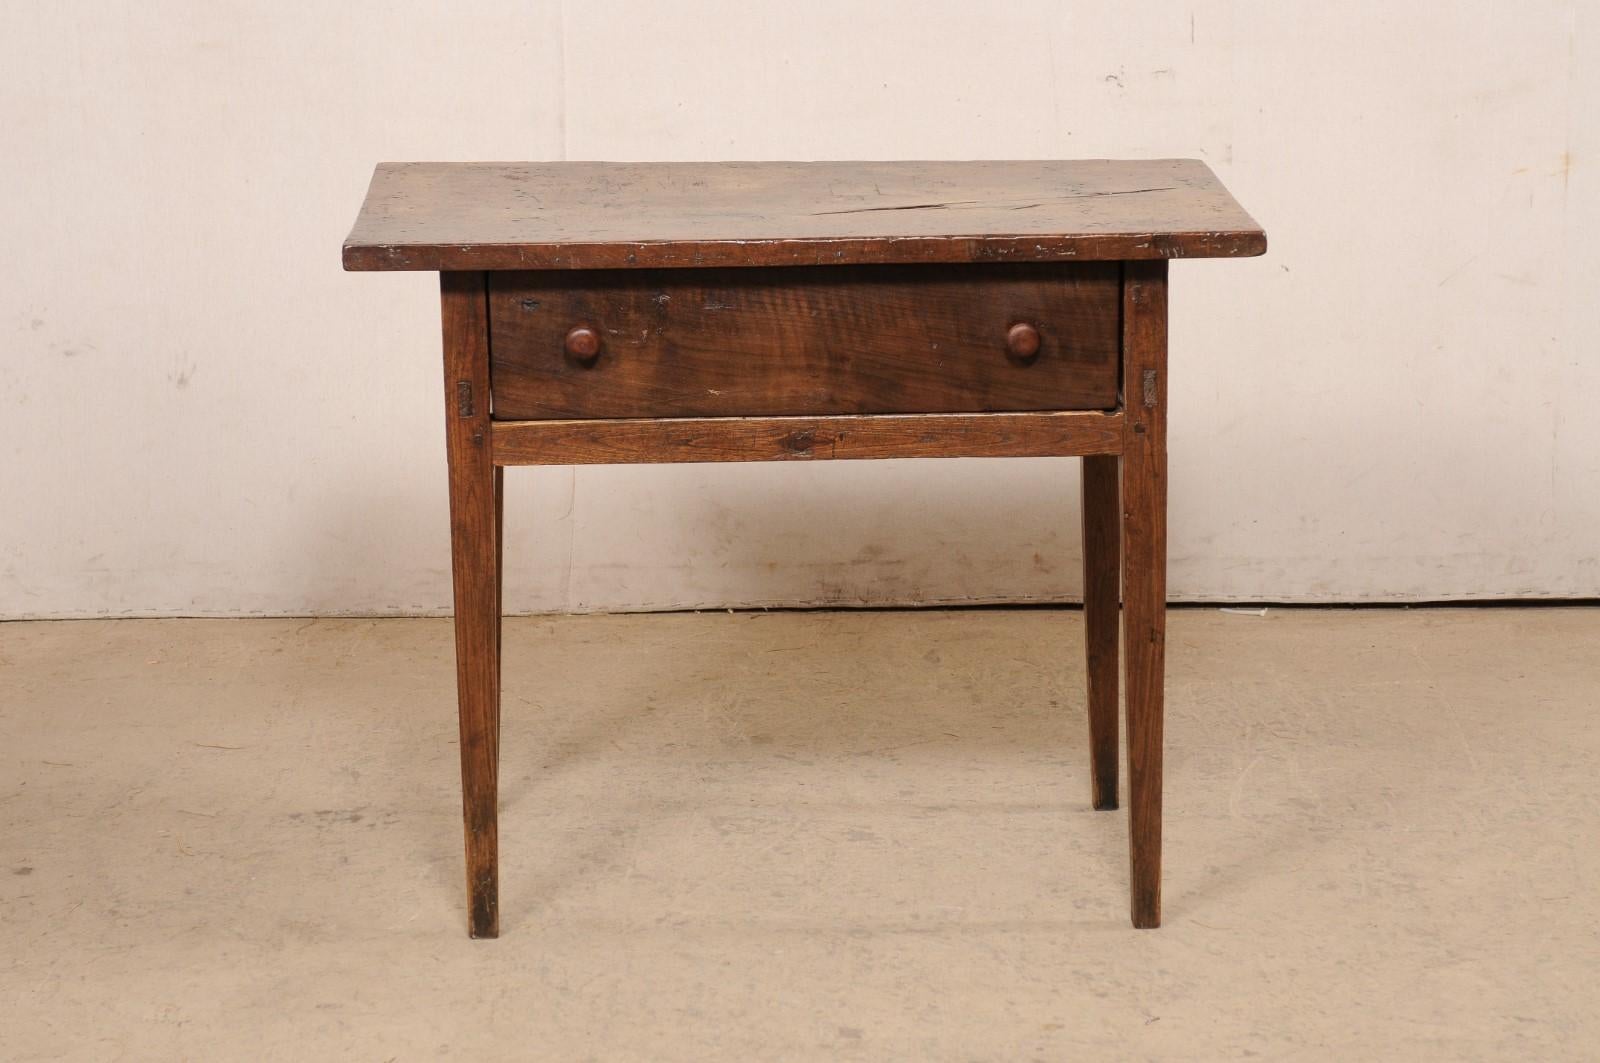 18th C. Spanish Carved-Walnut Table w/Drawer (Top has Fabulous Old Patina!) For Sale 6